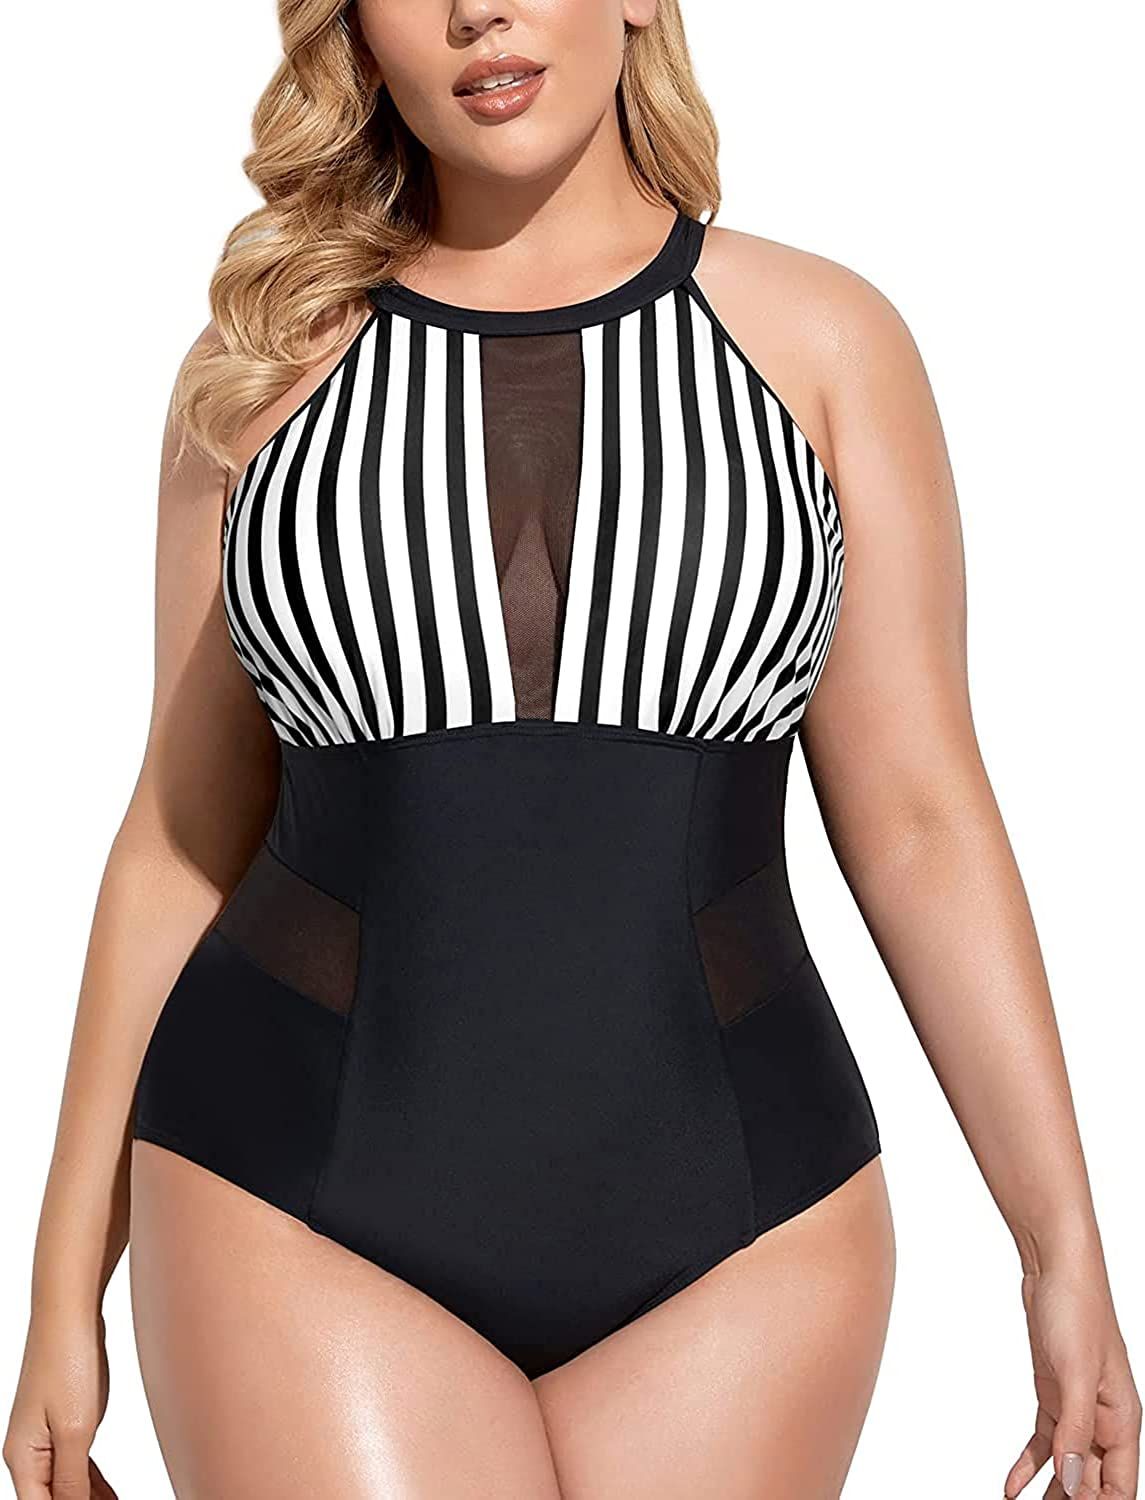 Daci Plus Size One Piece Swimsuit for Women High Neck Plunge Mesh Cut Out Bathing Suits | Amazon (US)